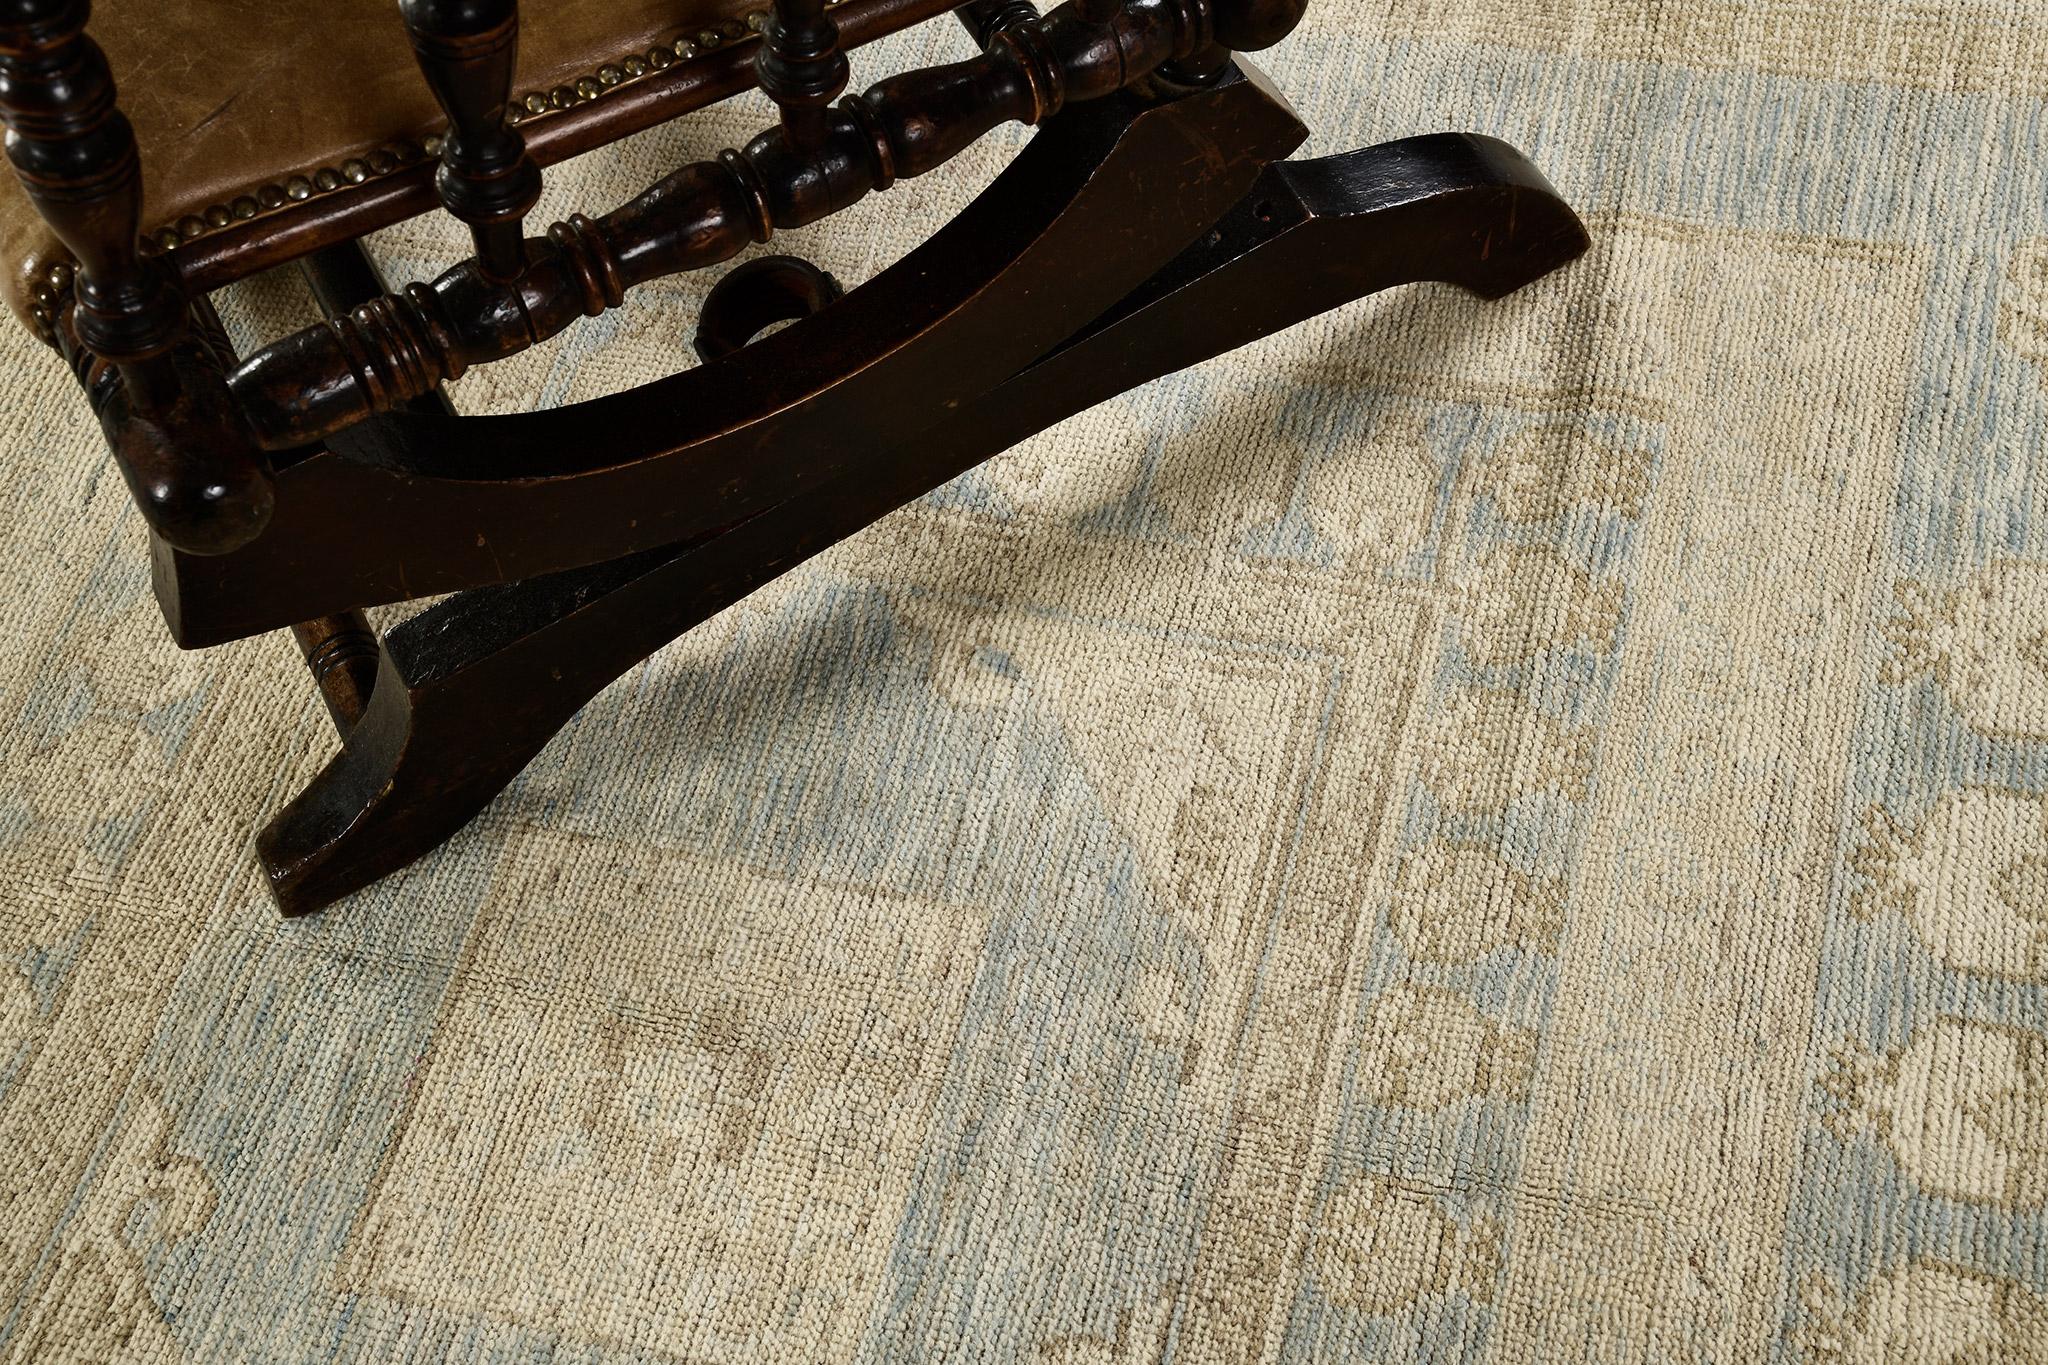 A phenomenal Oushak design revival rug that has a classic and timeless pattern. Featuring the collaboration of muted tones of dusty blue, sky blue and sand, this classy rug is composed with enchanting graceful palmettes and florid elements that